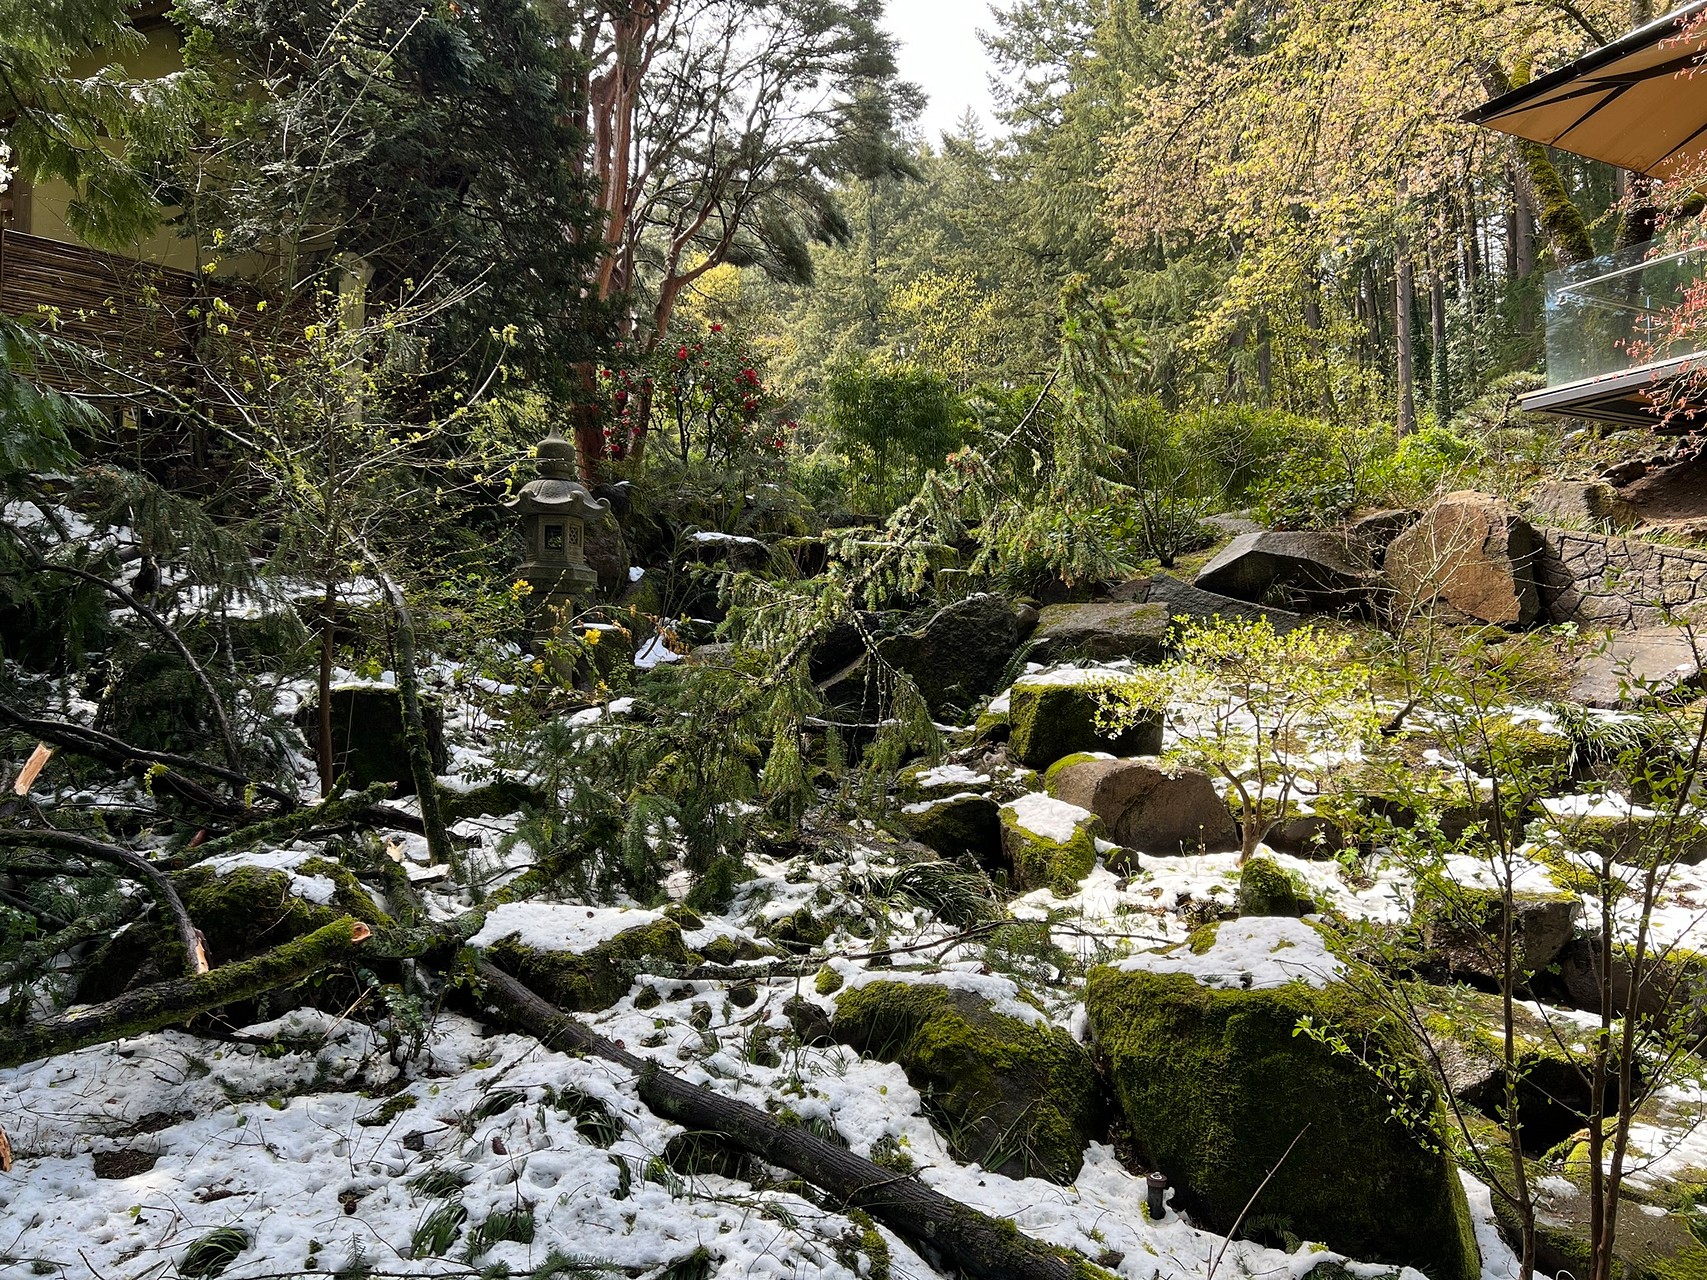 Fallen tree branches in the Entry Garden after a surprise snow storm in April 2022. Photo by Portland Japanese Garden.